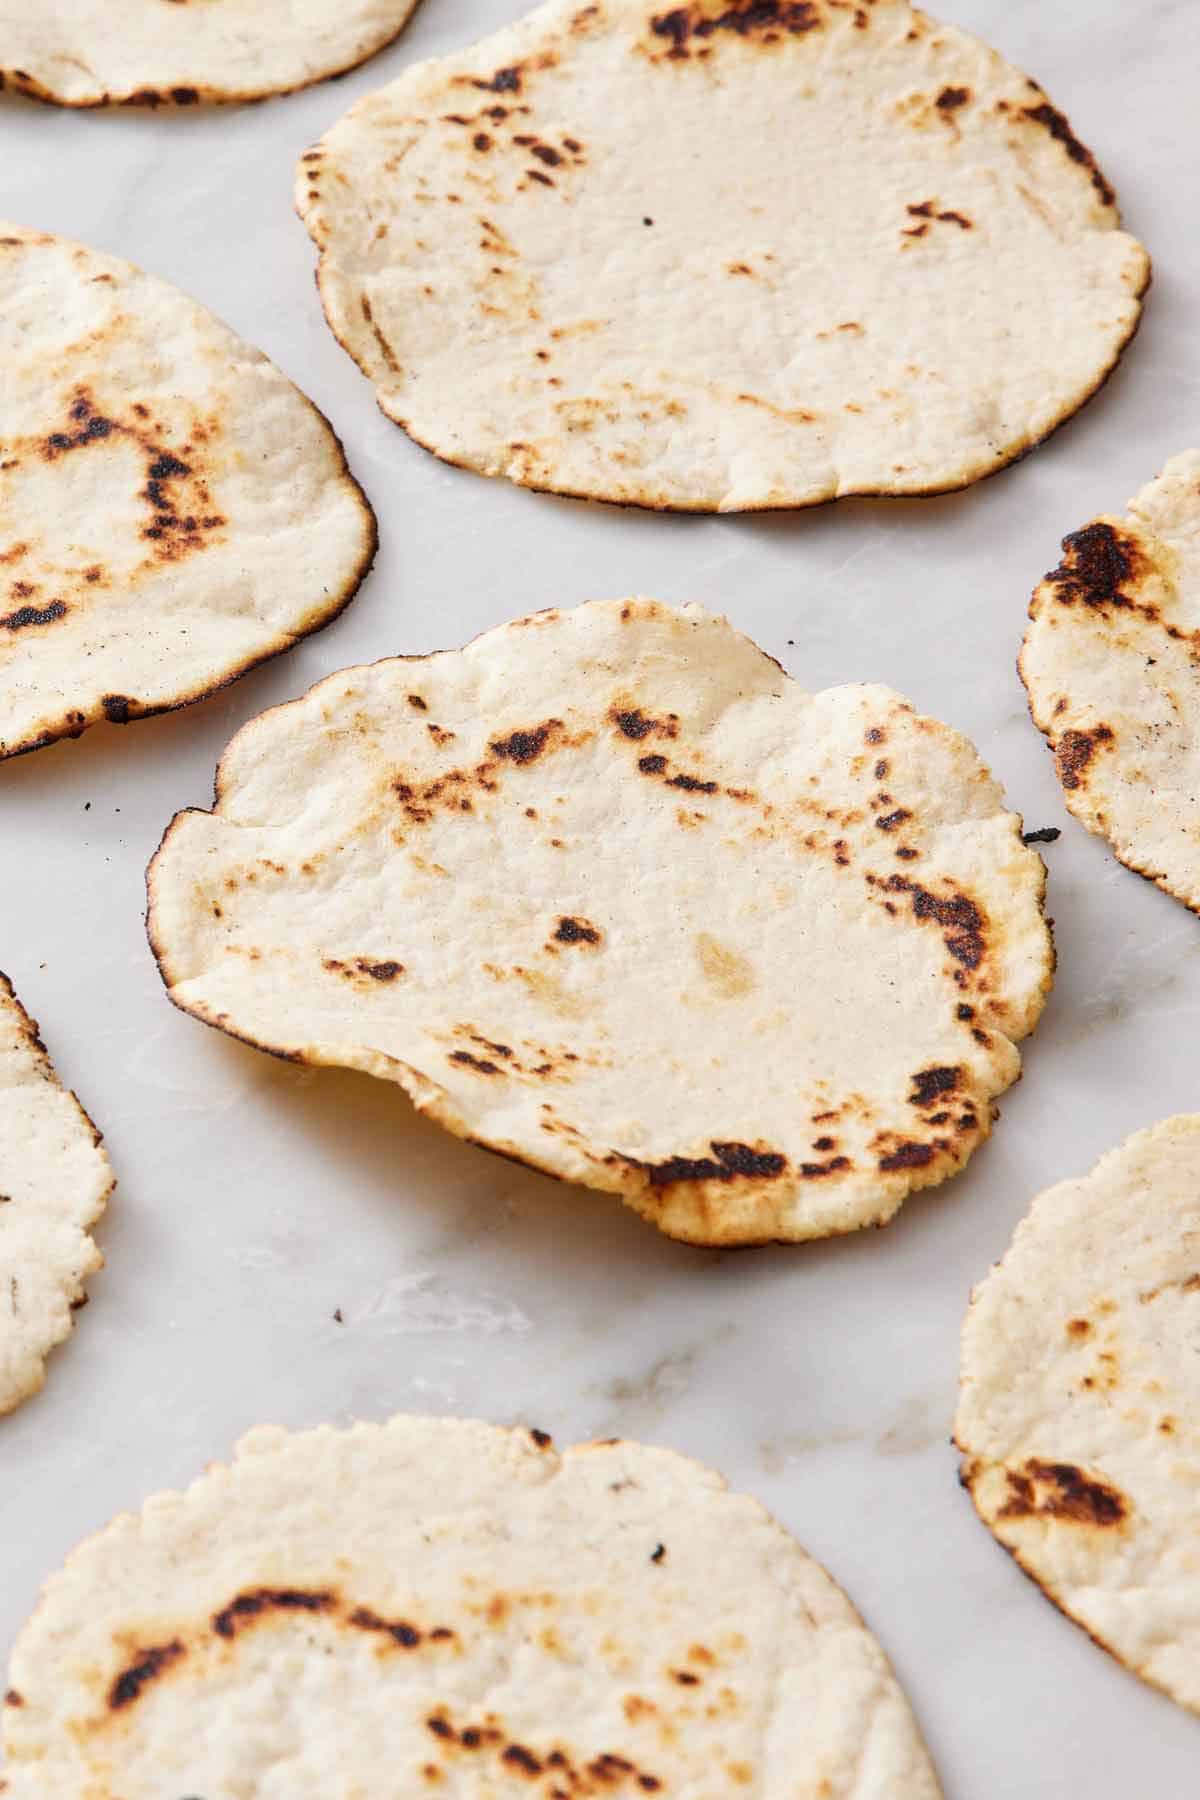 Multiple corn tortillas in a single layer on a marble surface.